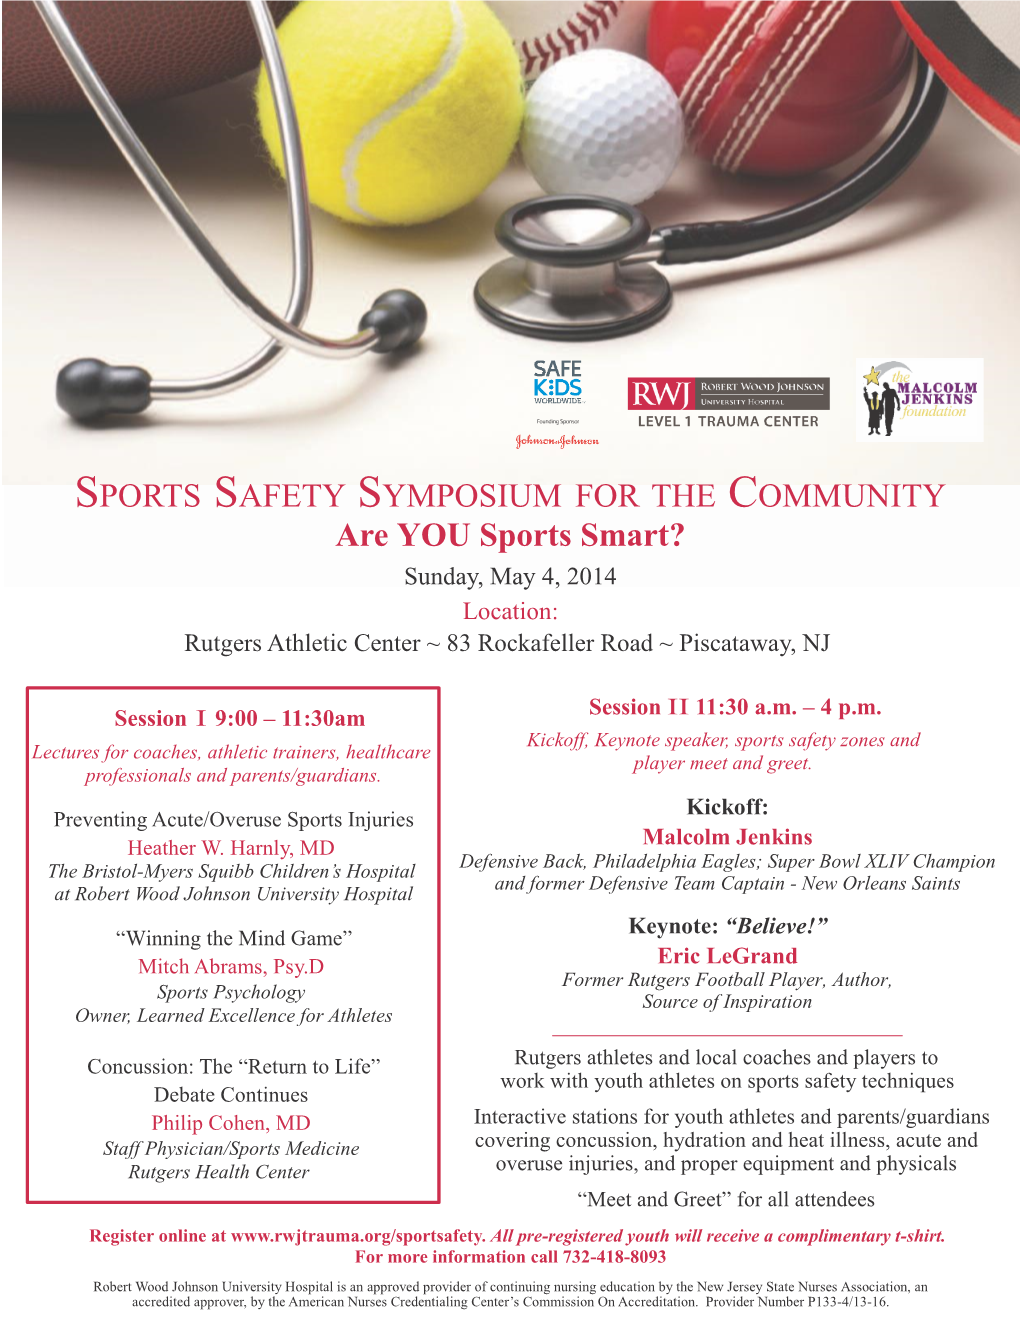 SPORTS SAFETY SYMPOSIUM for the COMMUNITY Are YOU Sports Smart?